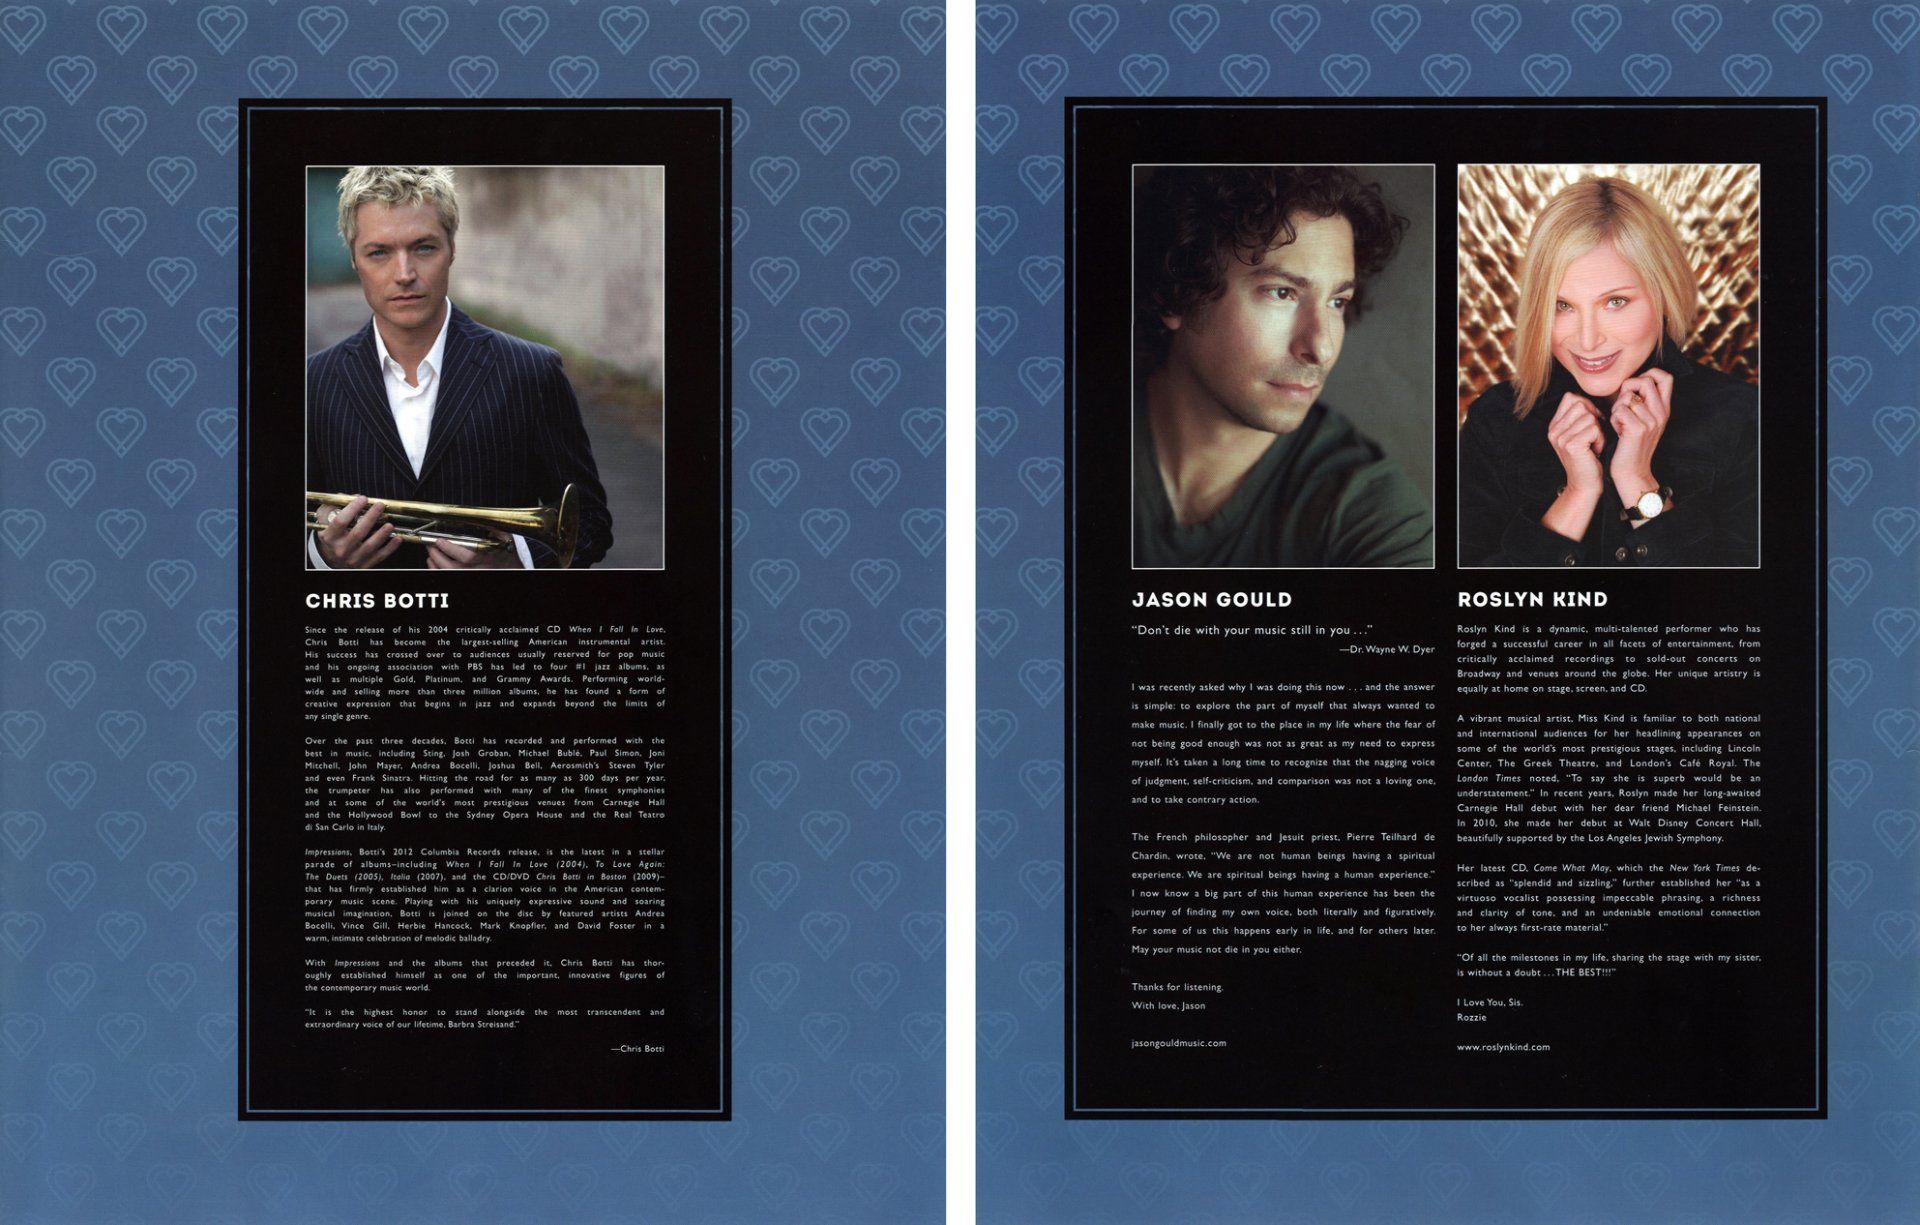 Front and back of the Europe program insert featuring photos and bios for Botti, Gould, and Kind.